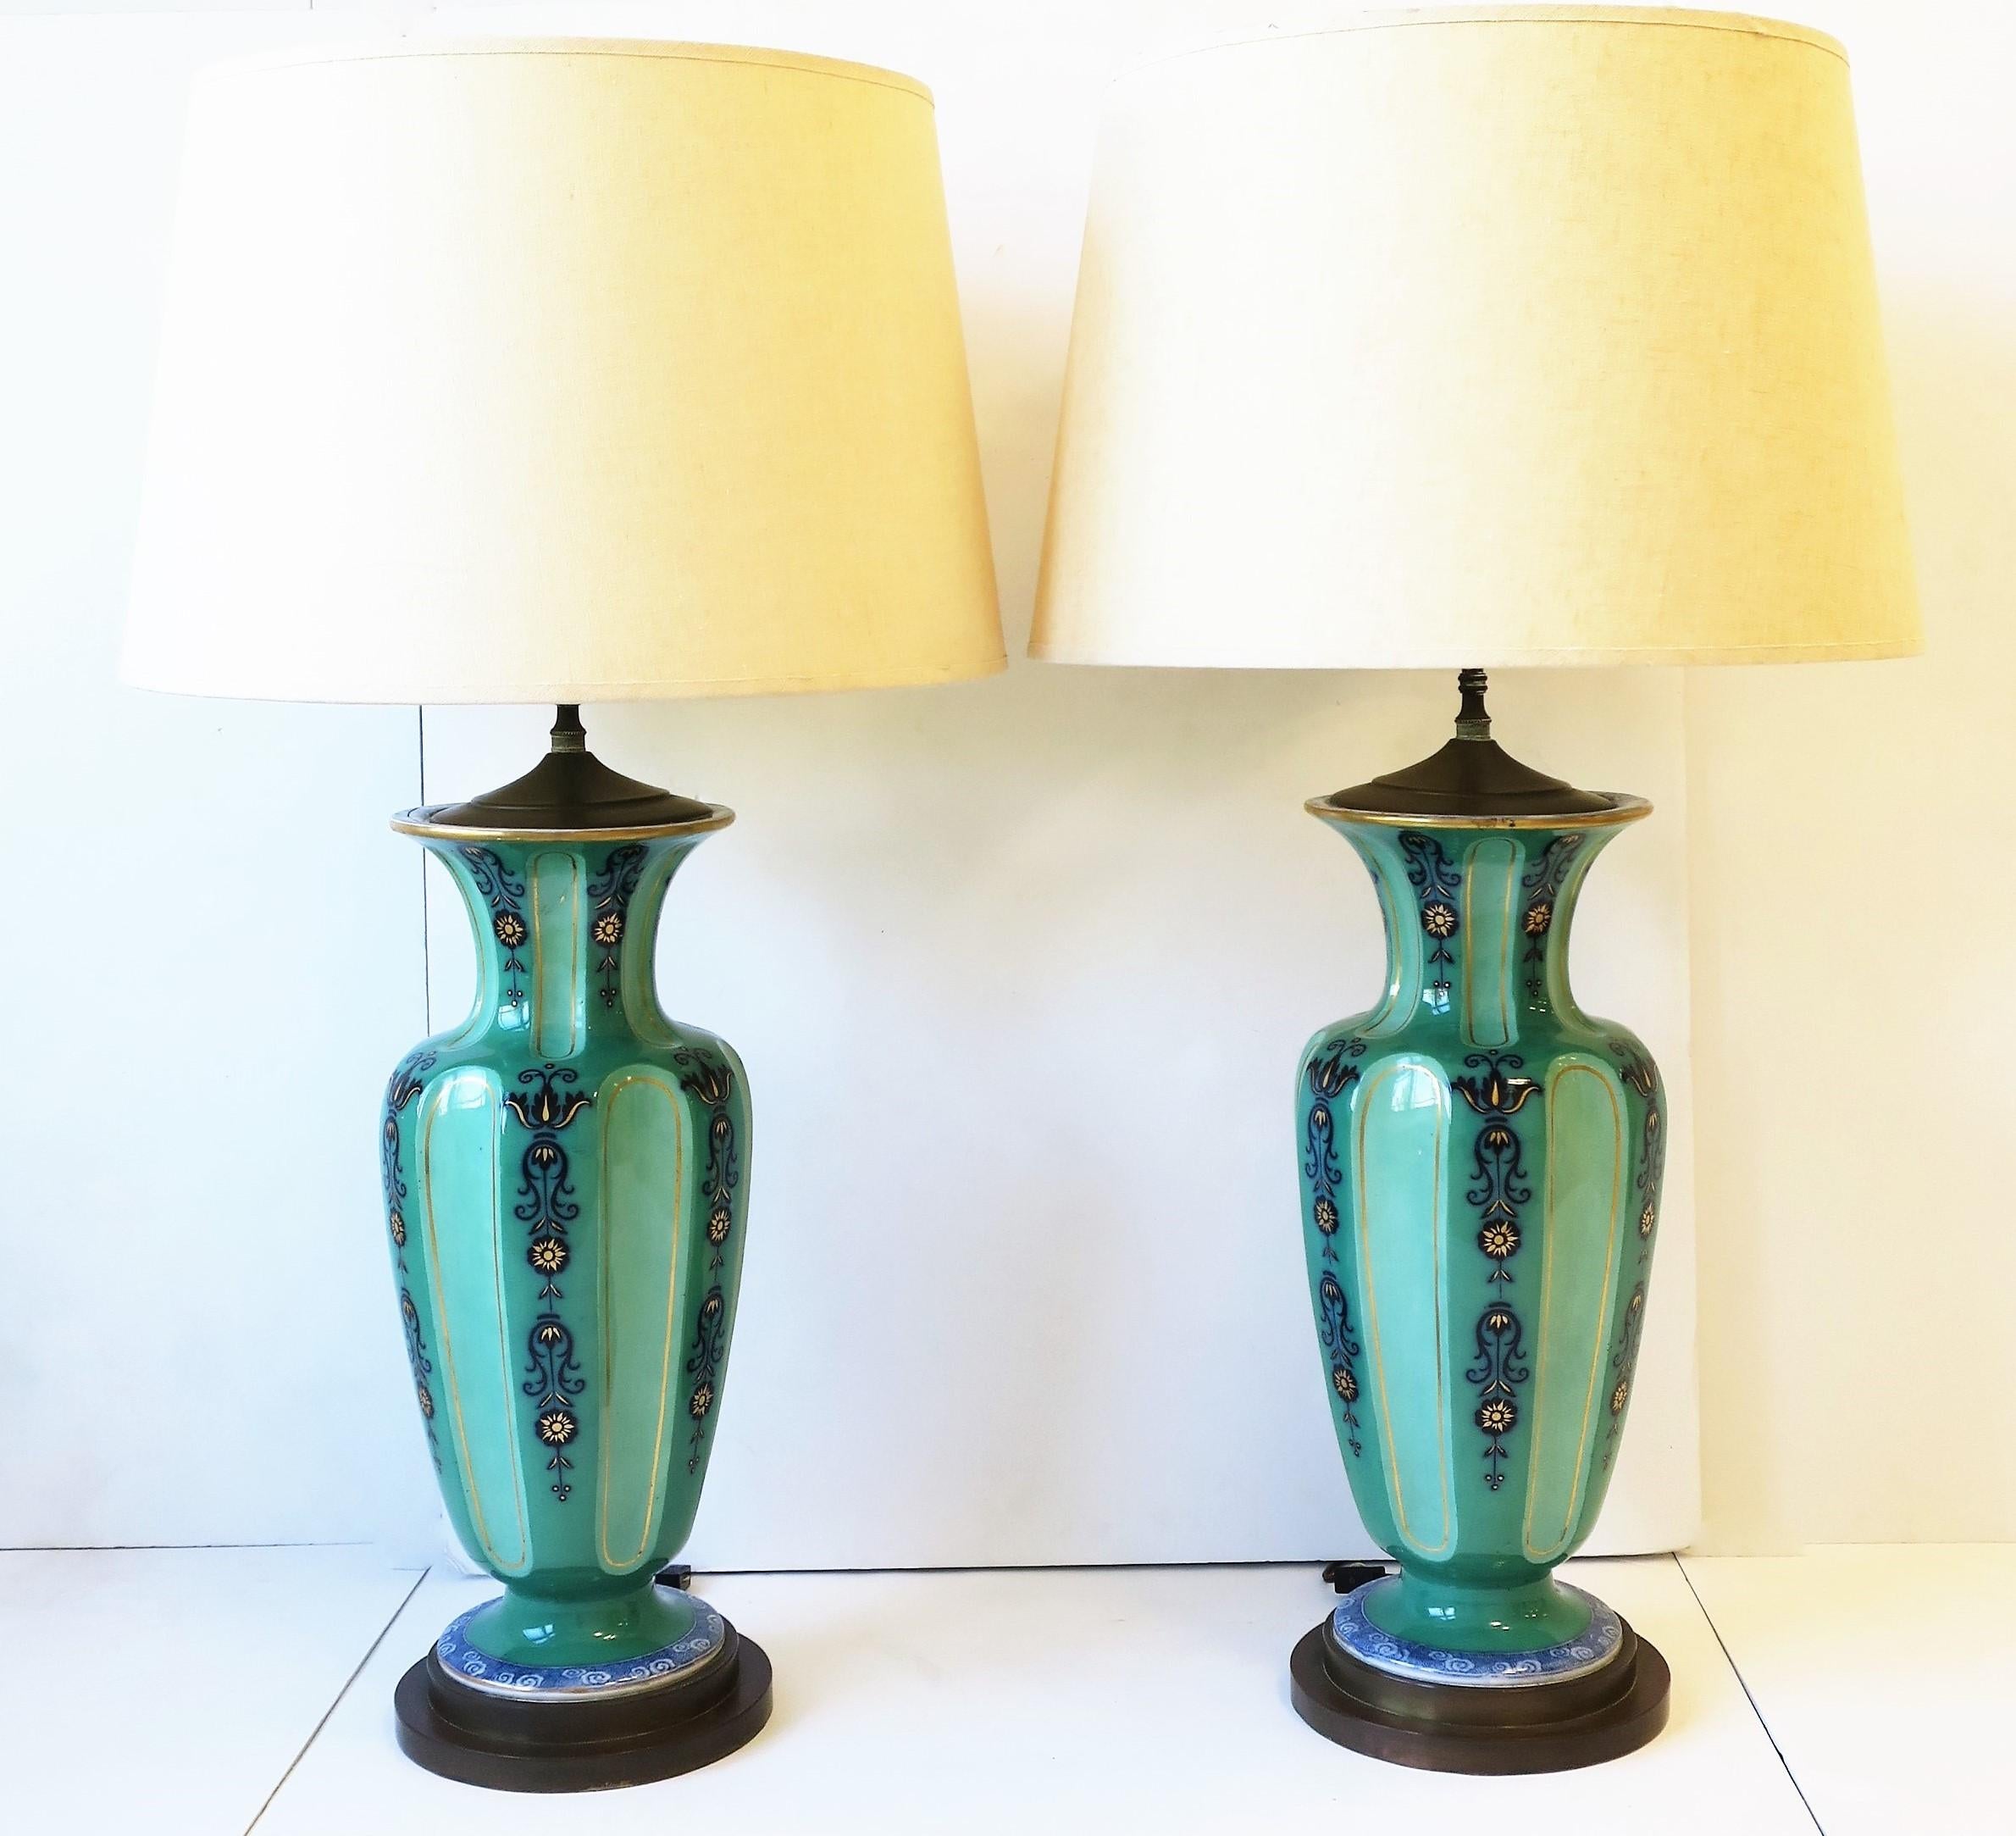 A very beautiful pair of large, tall, Dutch ceramic vase table lamps with brass hardware, Ginger Jar style, circa early-20th century, 1930s, Holland. Colors include Emerald green, light-green, Sapphire blue, blue, white, and touches of gold. On/Off